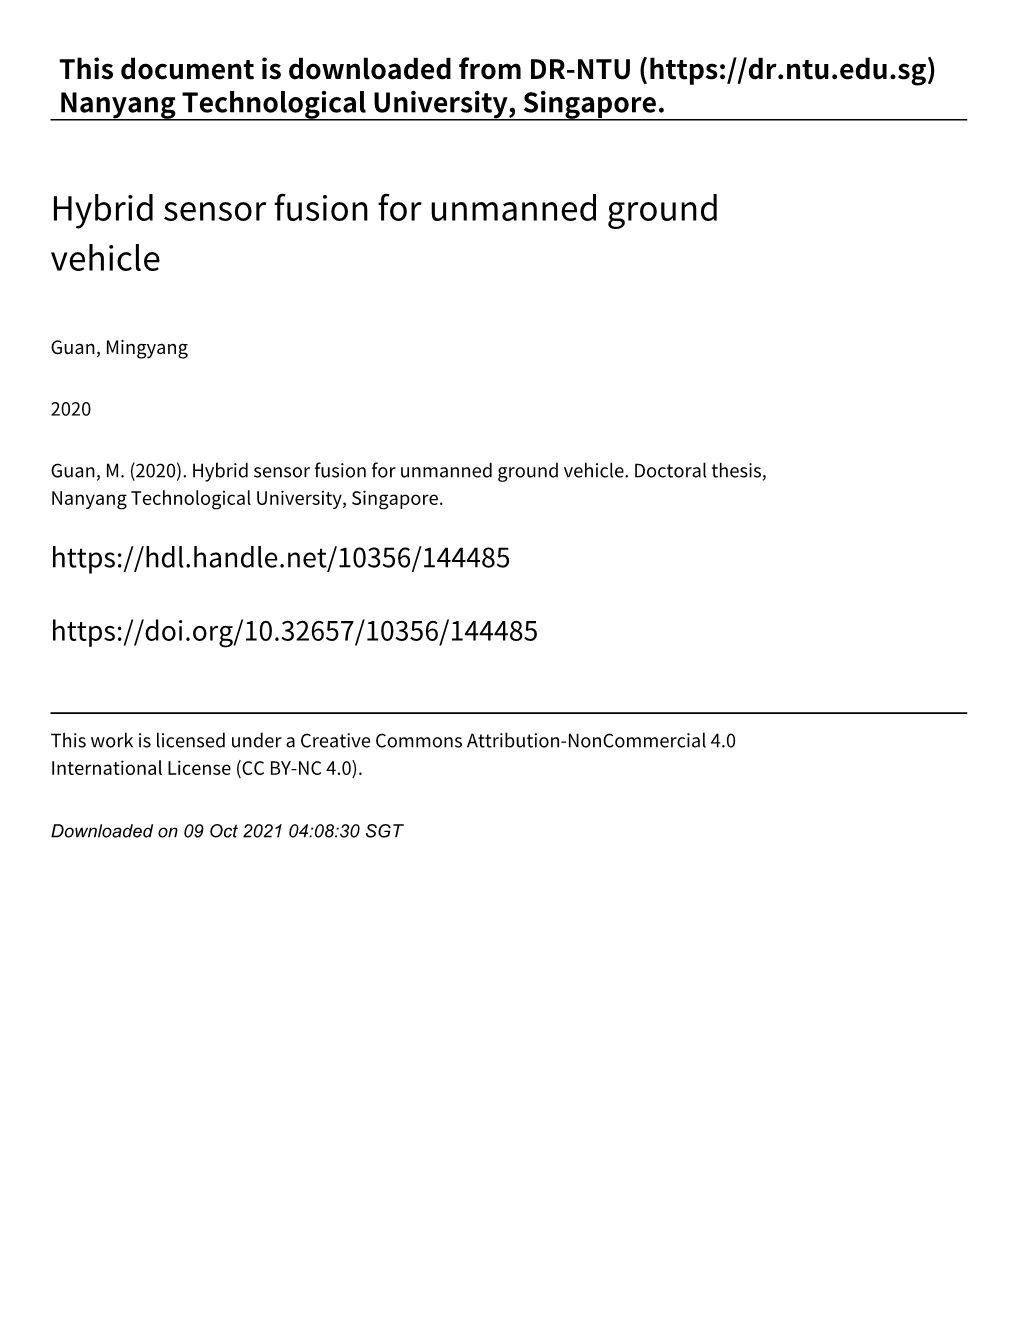 Hybrid Sensor Fusion for Unmanned Ground Vehicle